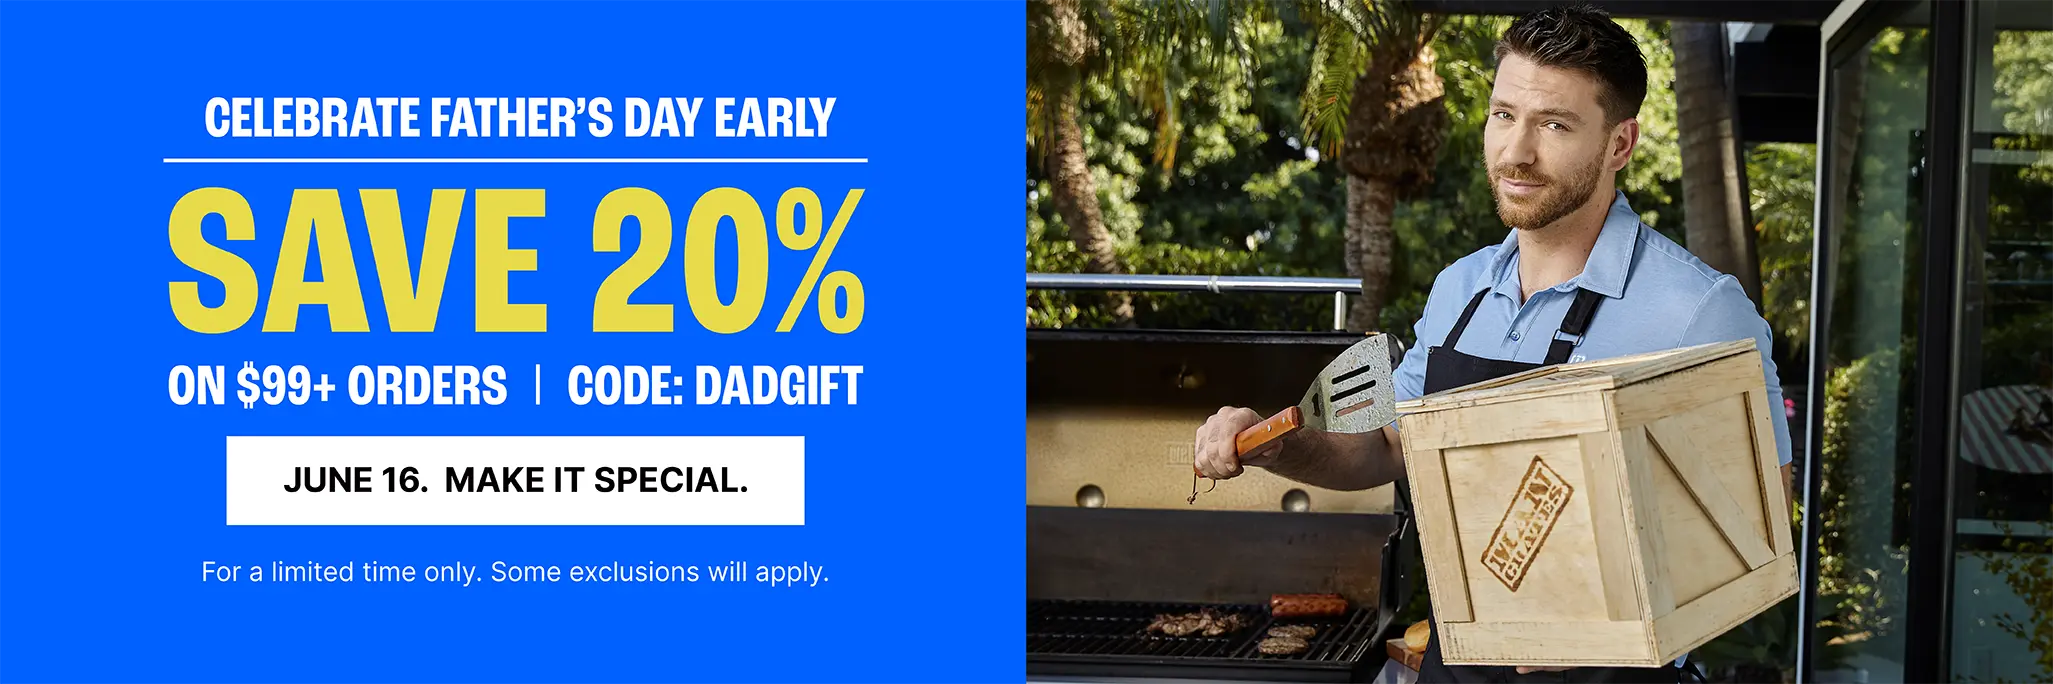 Man with crate: Save 20% on orders $99+ with code DADGIFT.